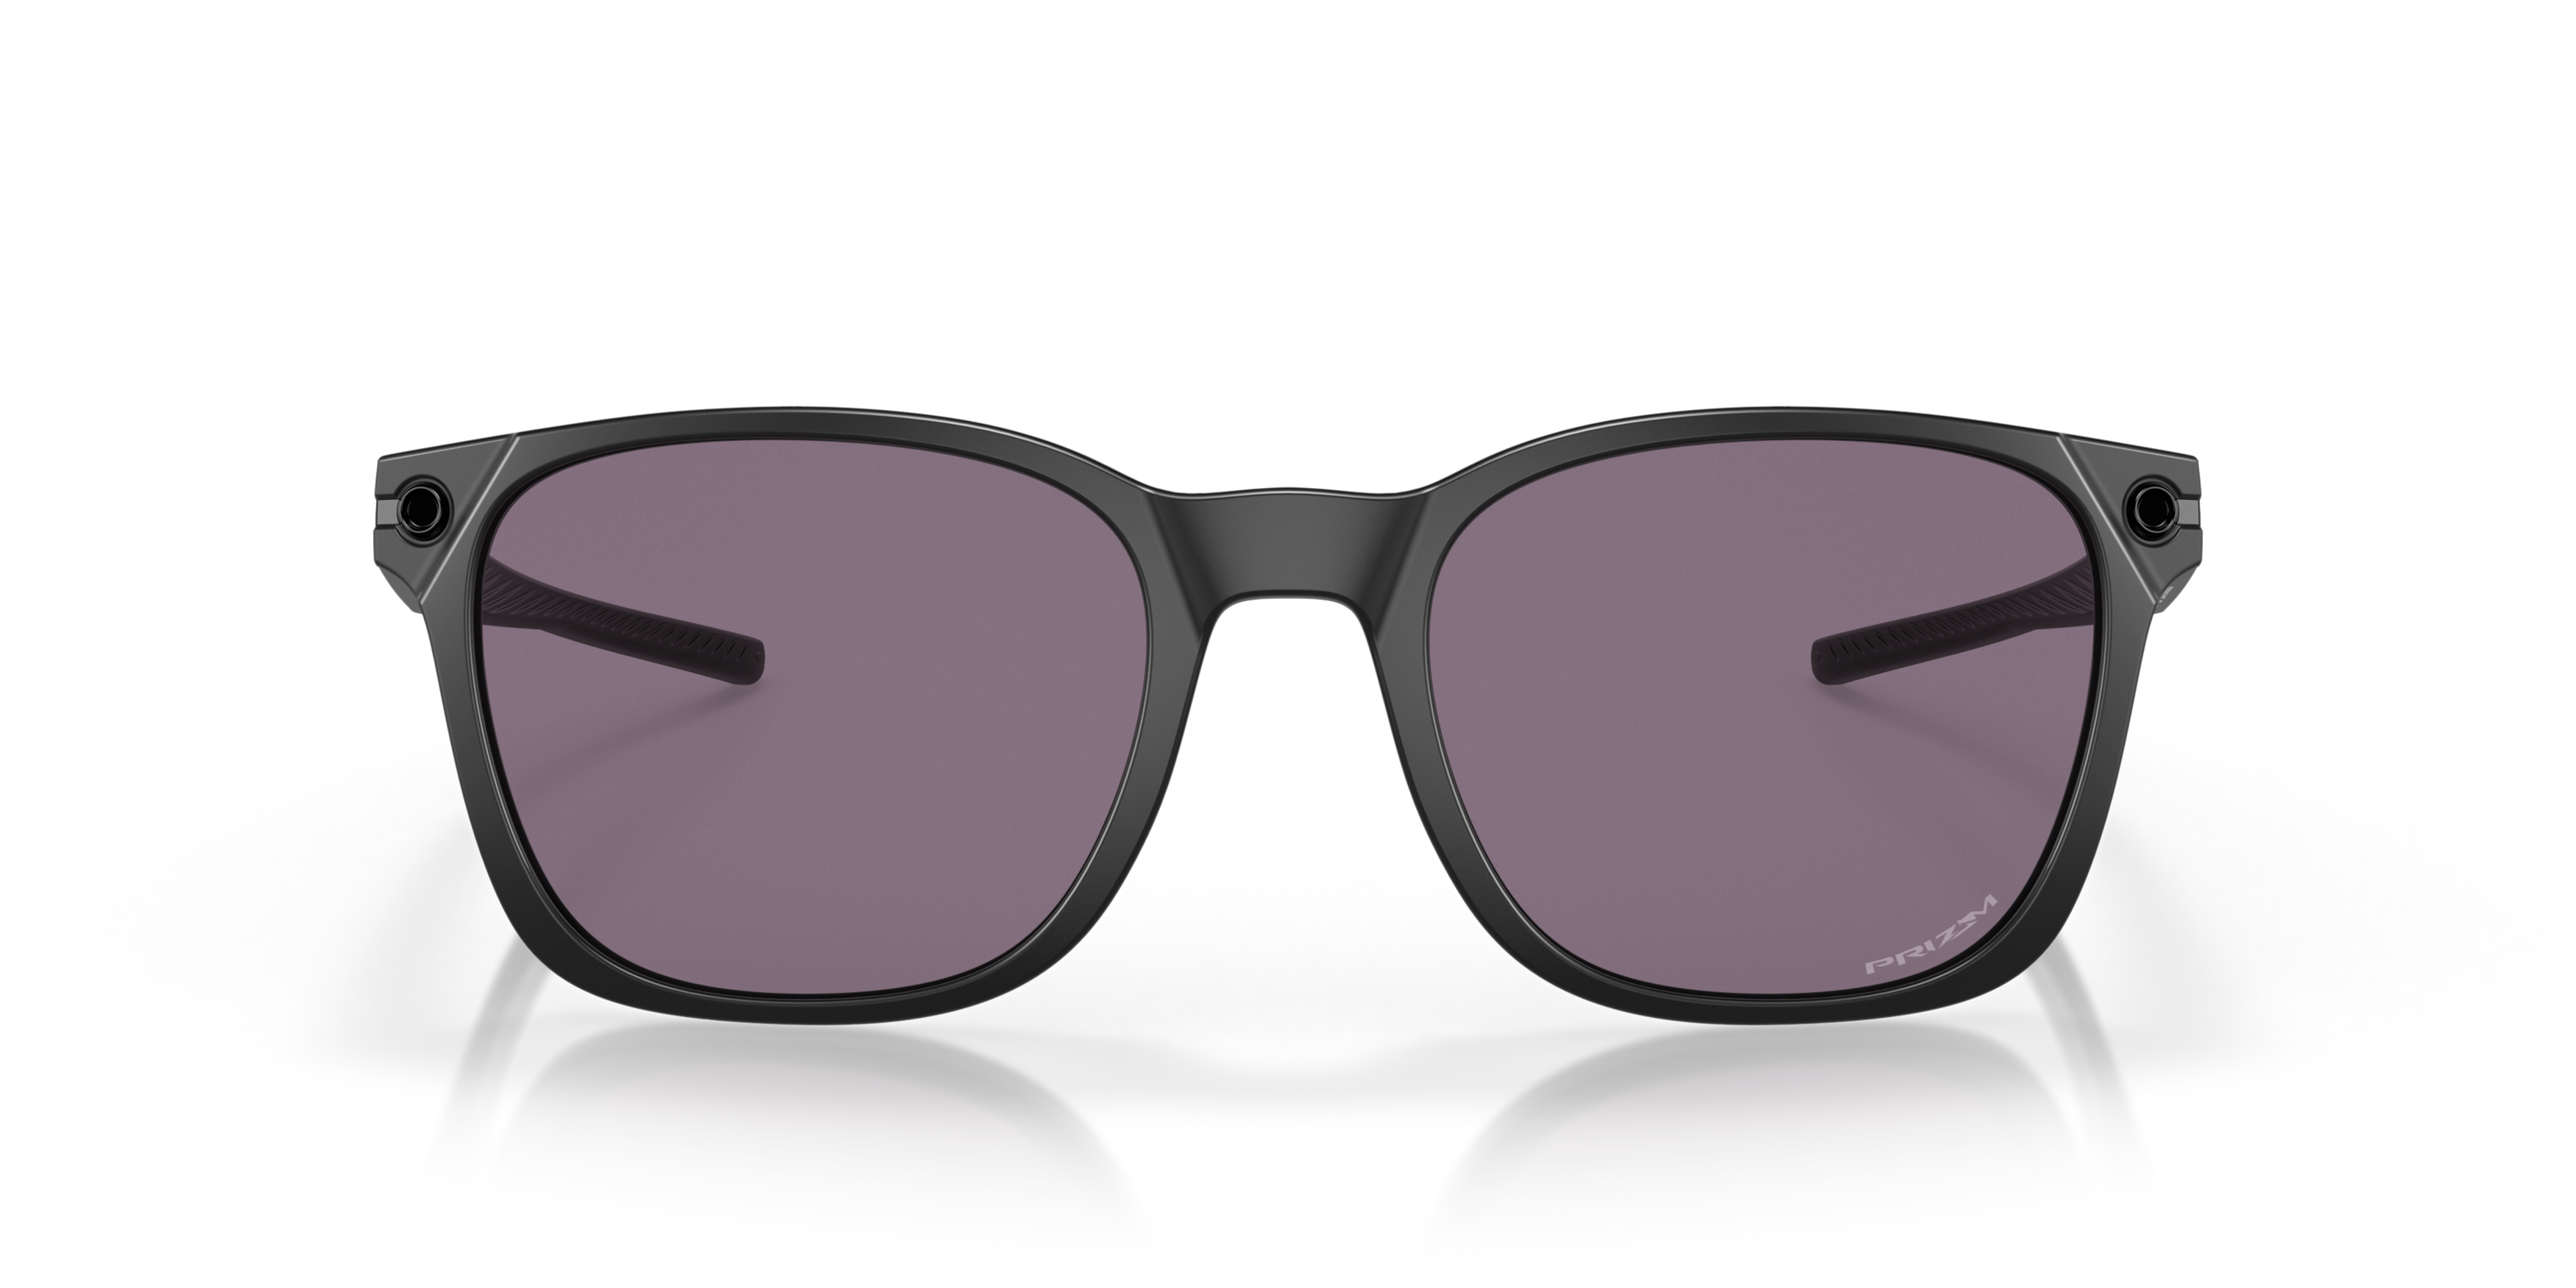 [products.image.front] OAKLEY OO9018 901801